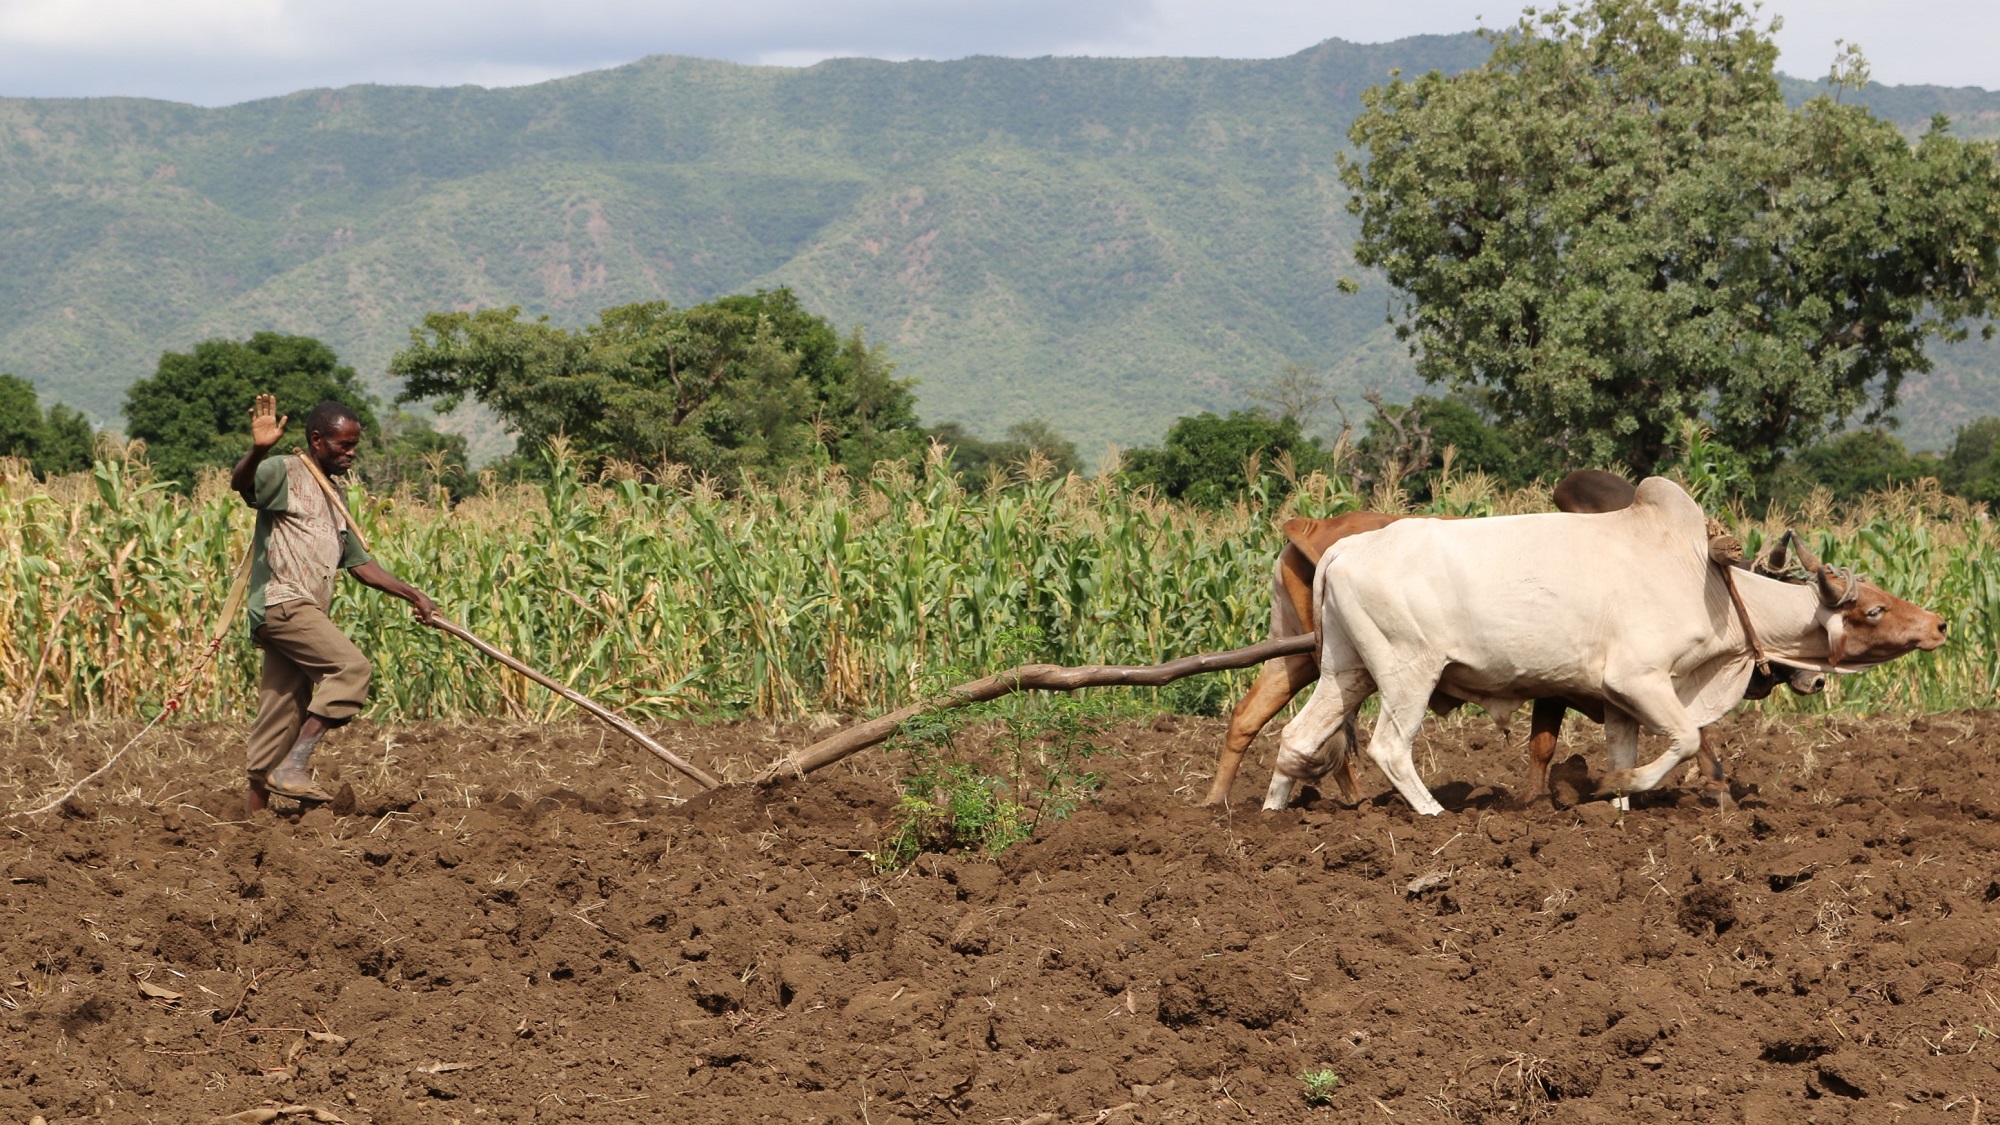 Ploughing cotton fields in Ethiopia